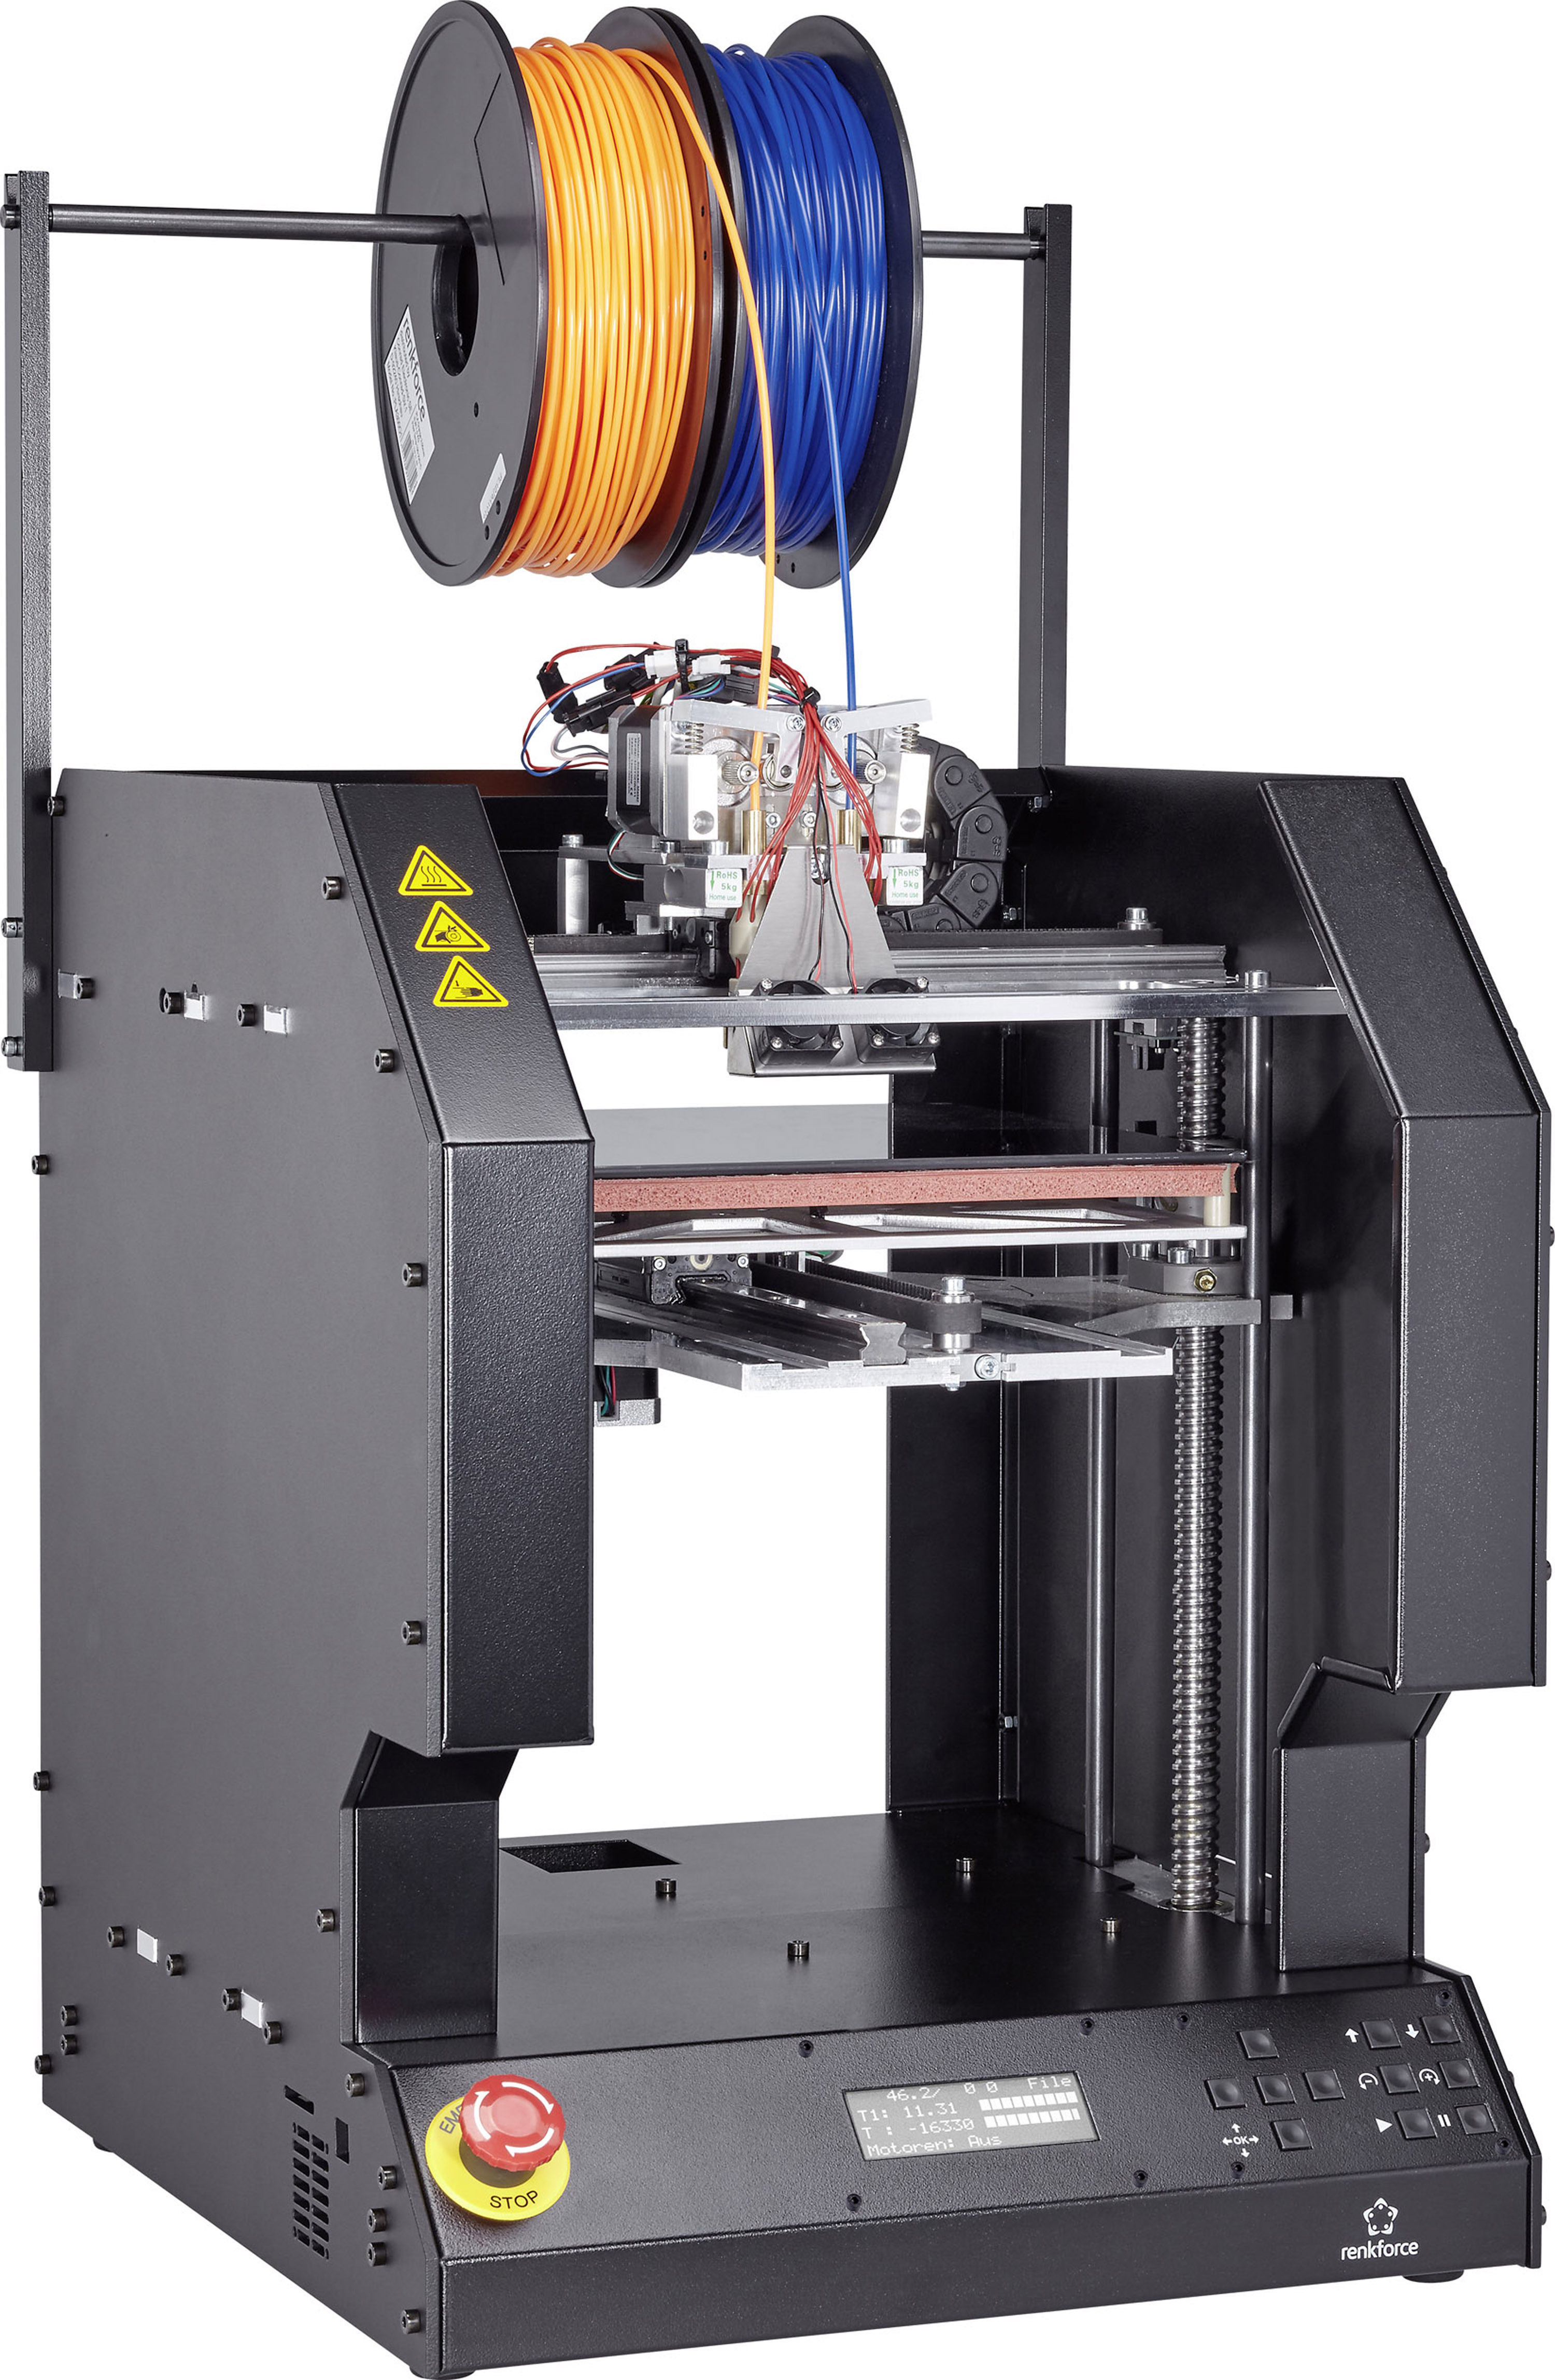 3D Printer with Dual Extruders - CRD221 Image2 1395717 RB 300 FB HRES